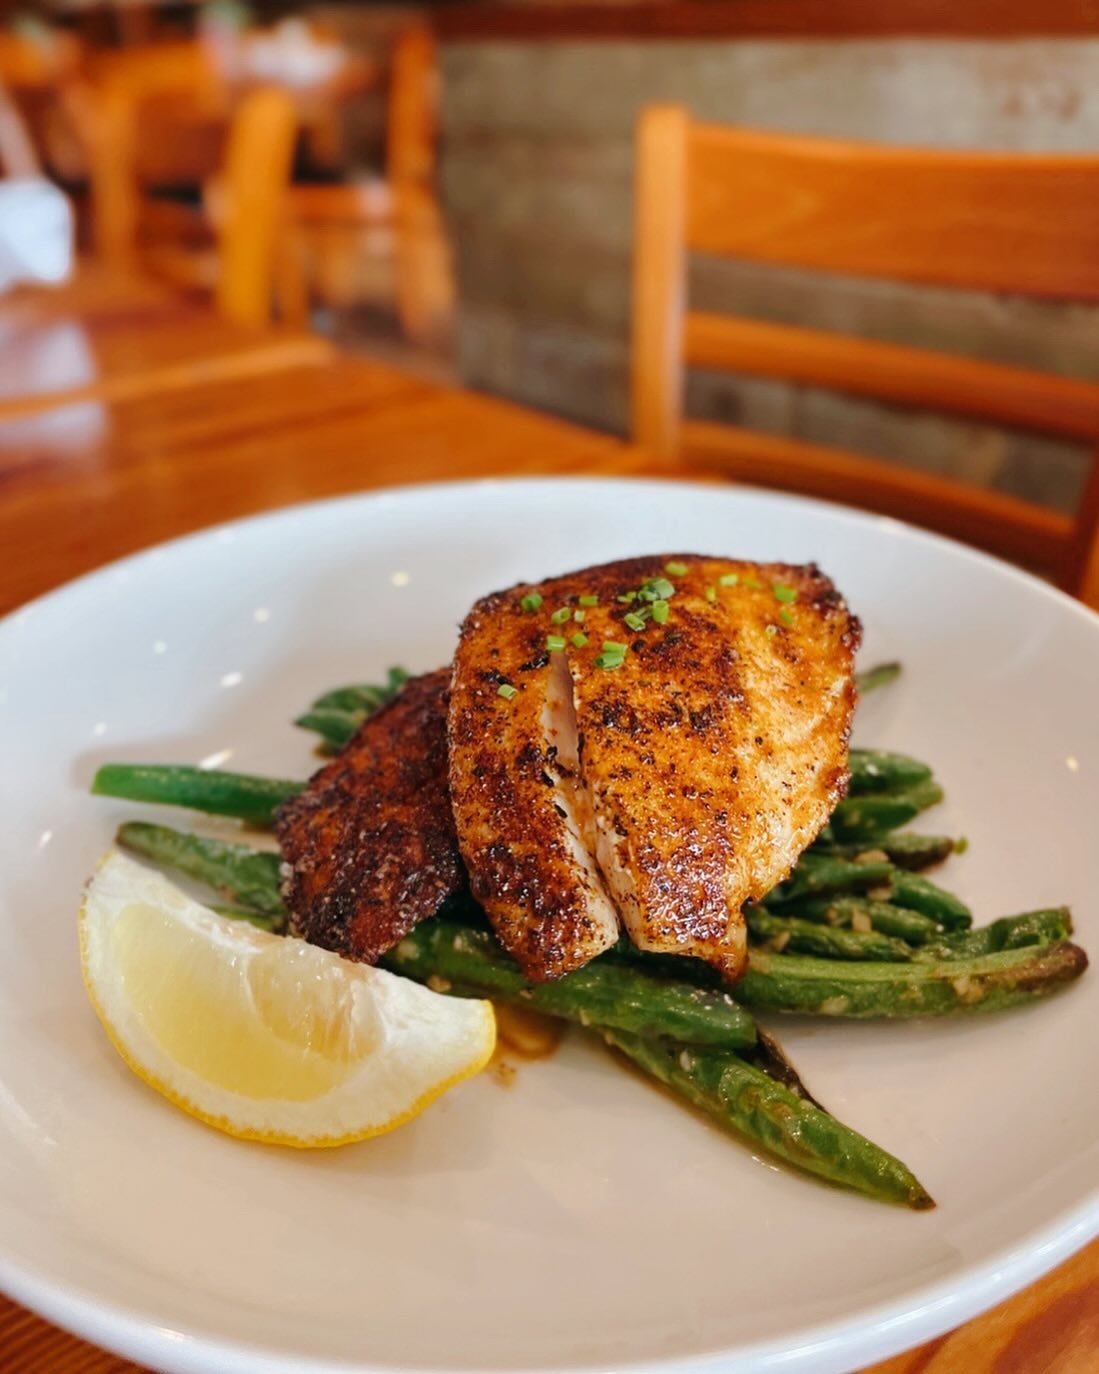 Dine with Us Today &amp; Enjoy Our Blackened Lunch Redfish over Saut&eacute;ed Haricot Verts! 🍽 Open 11AM to 9PM!